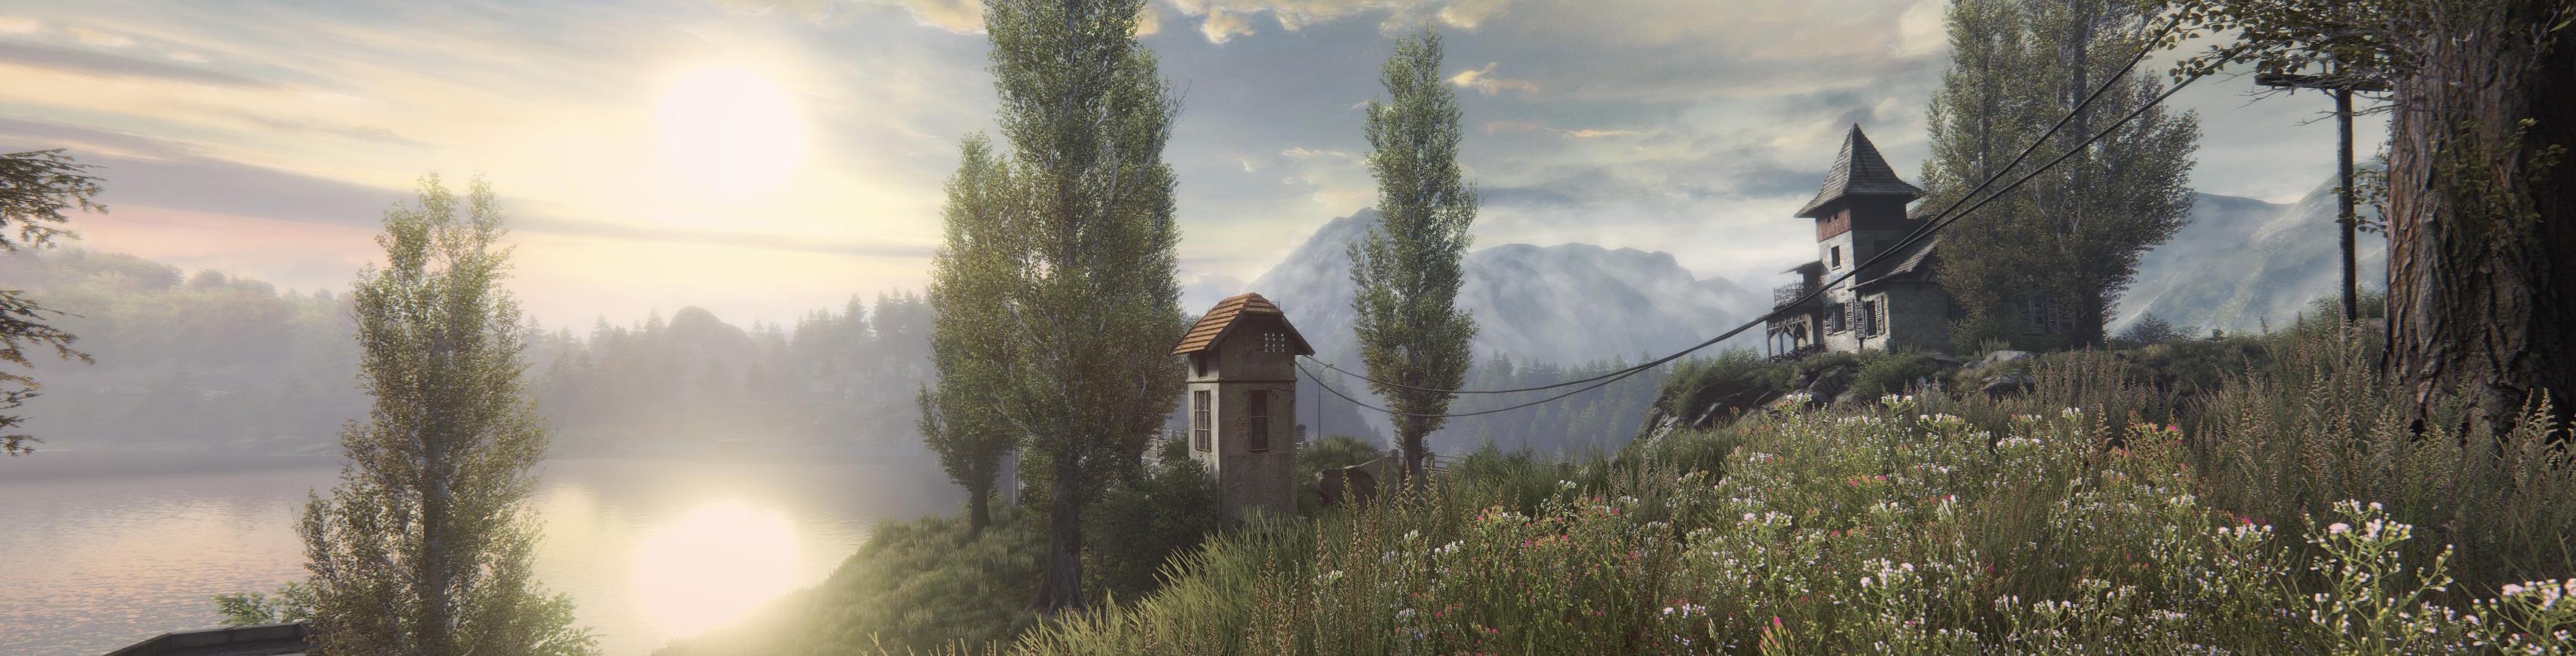 Image for The wait was worth it for Ethan Carter on Xbox One